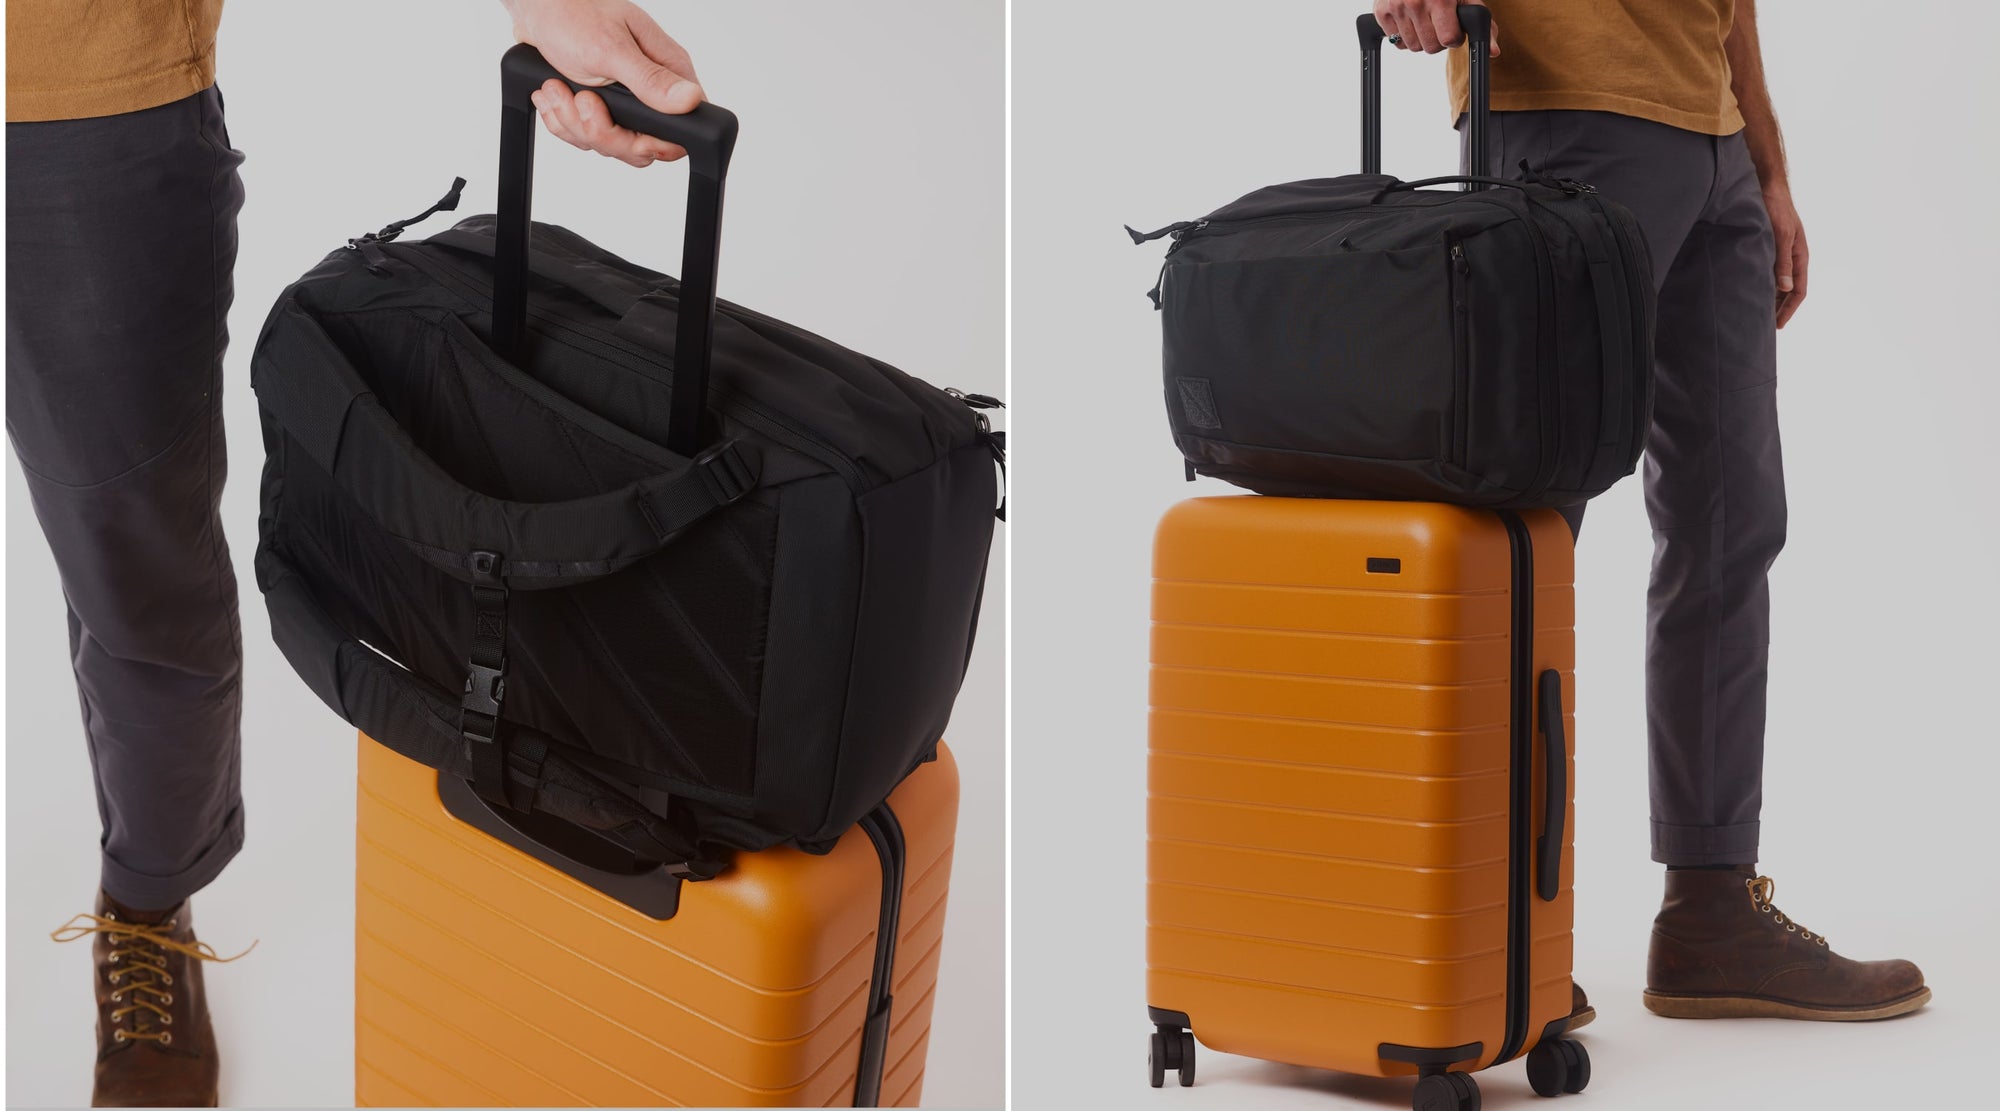 CIVIC Travel Bag 20L offers a luggage passthrough